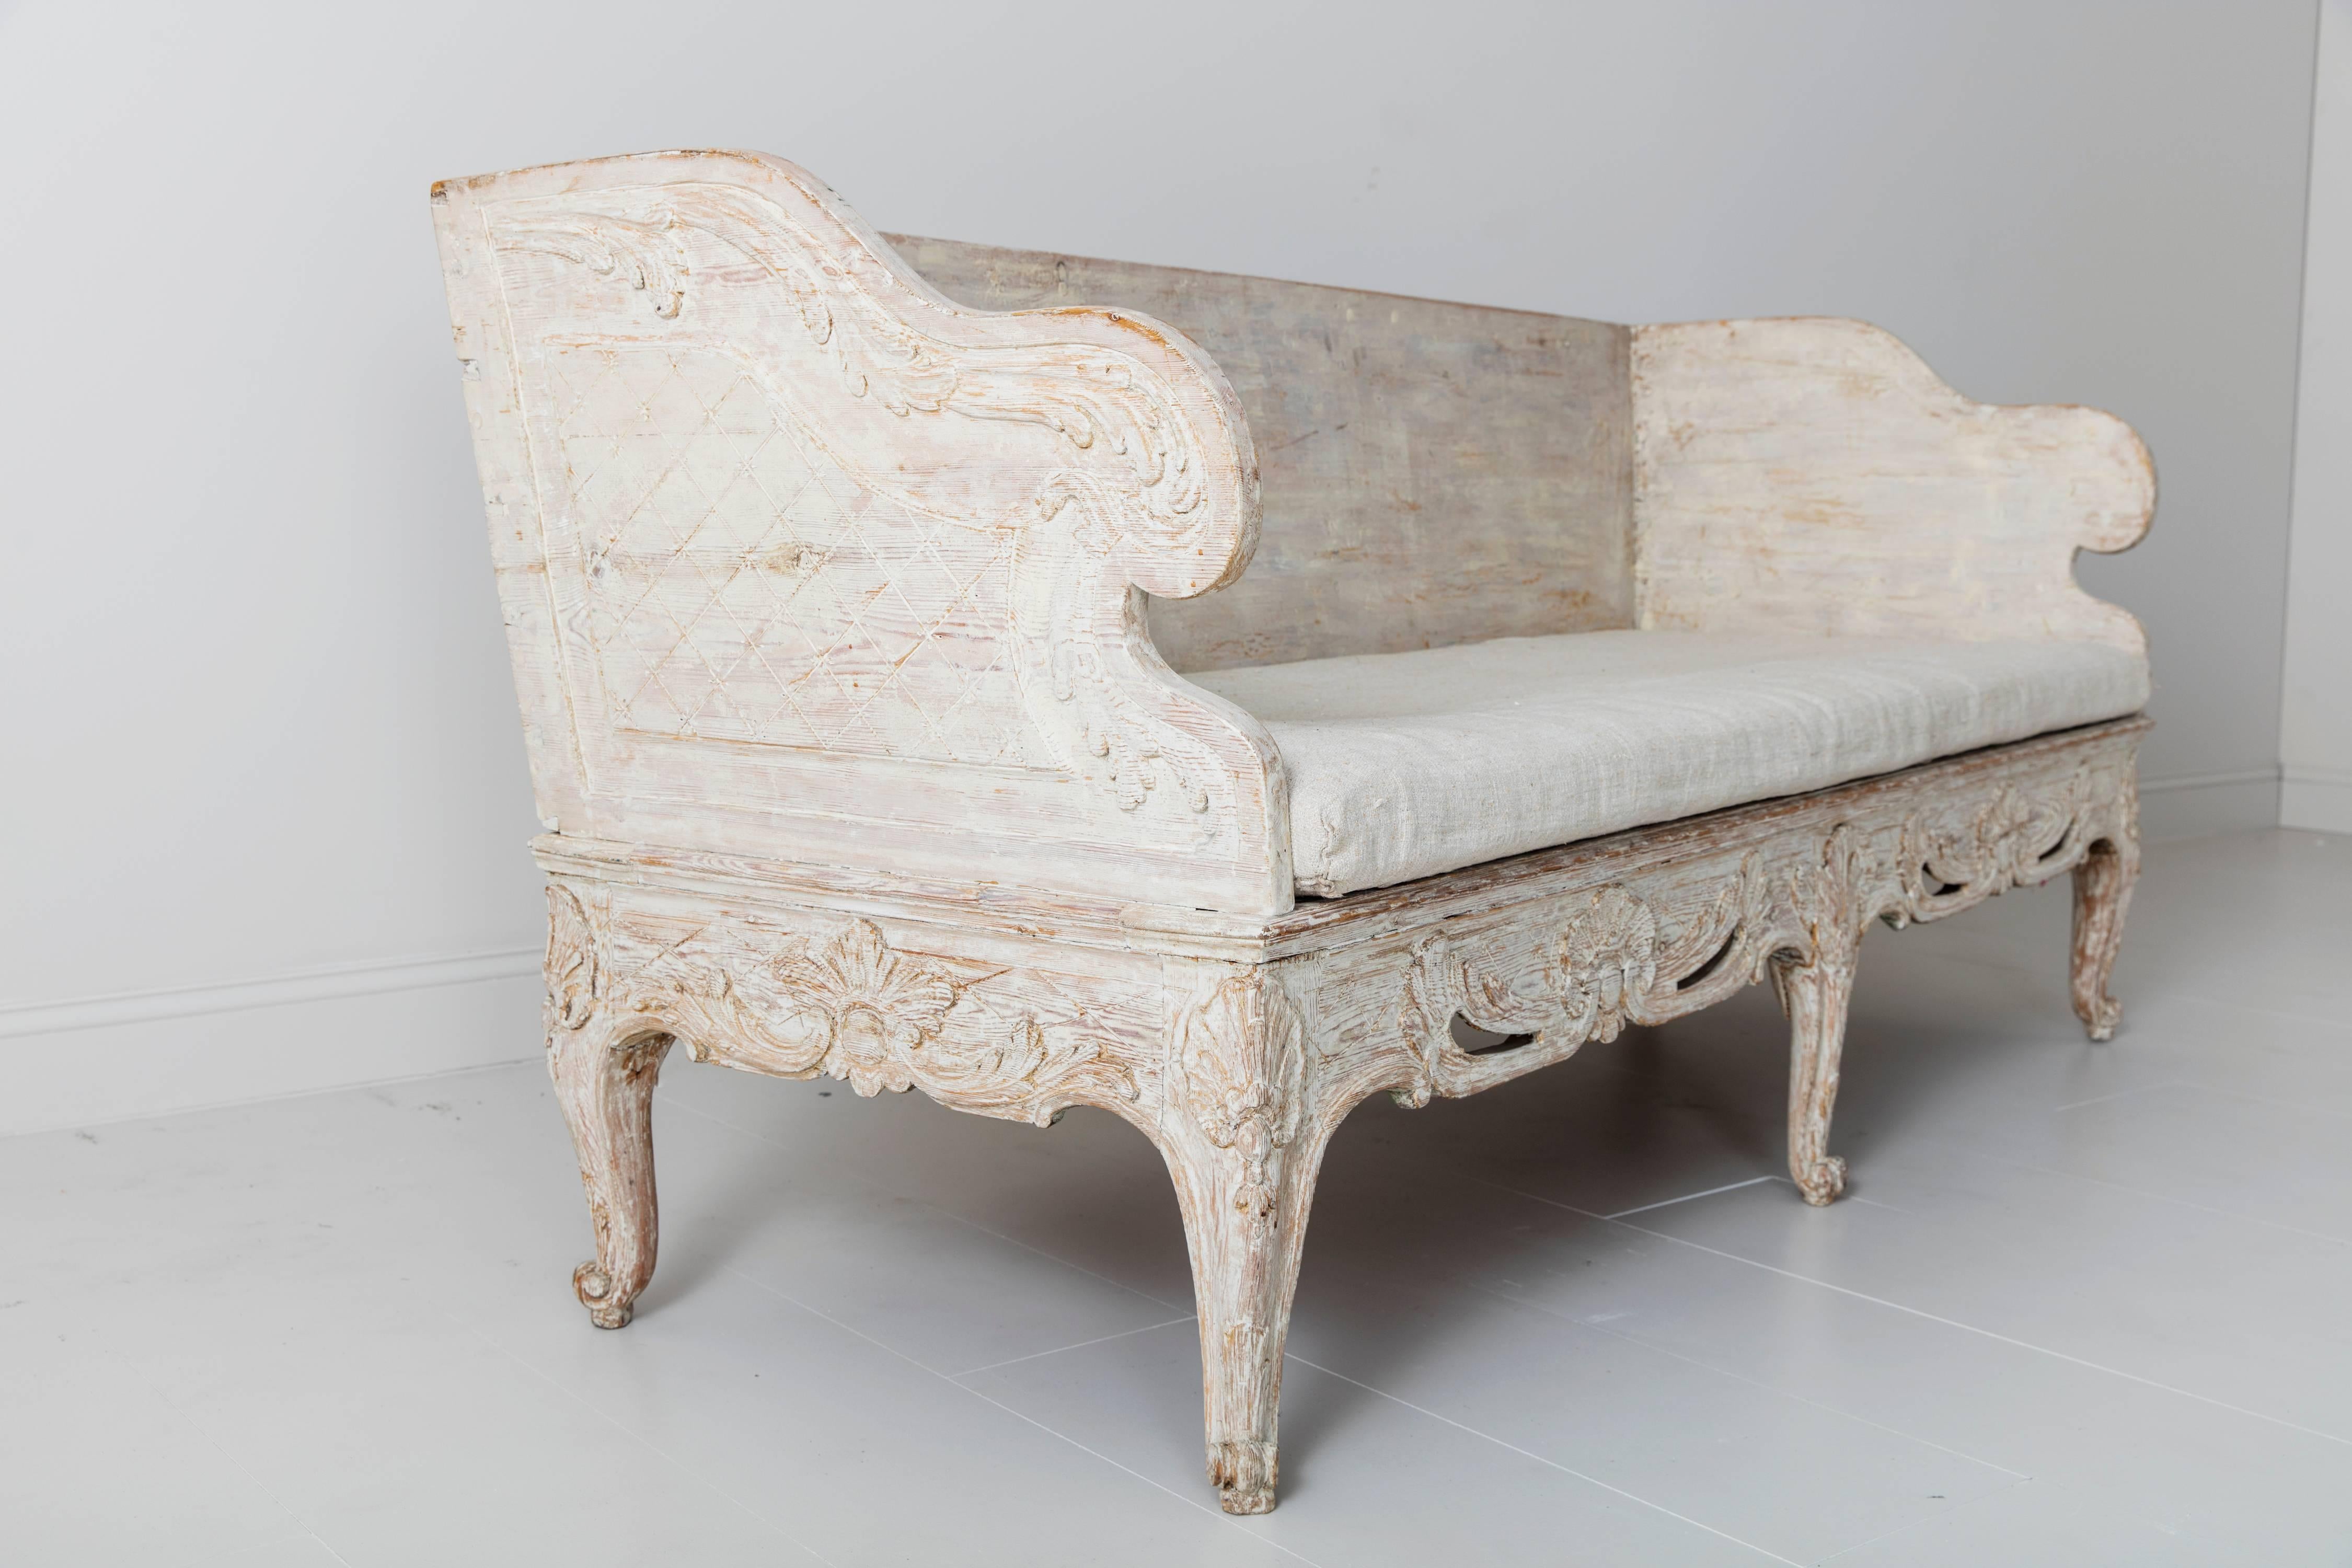 Hand-Crafted 18th Century Swedish Rococo Period Trag Sofa Bench in Original Paint For Sale